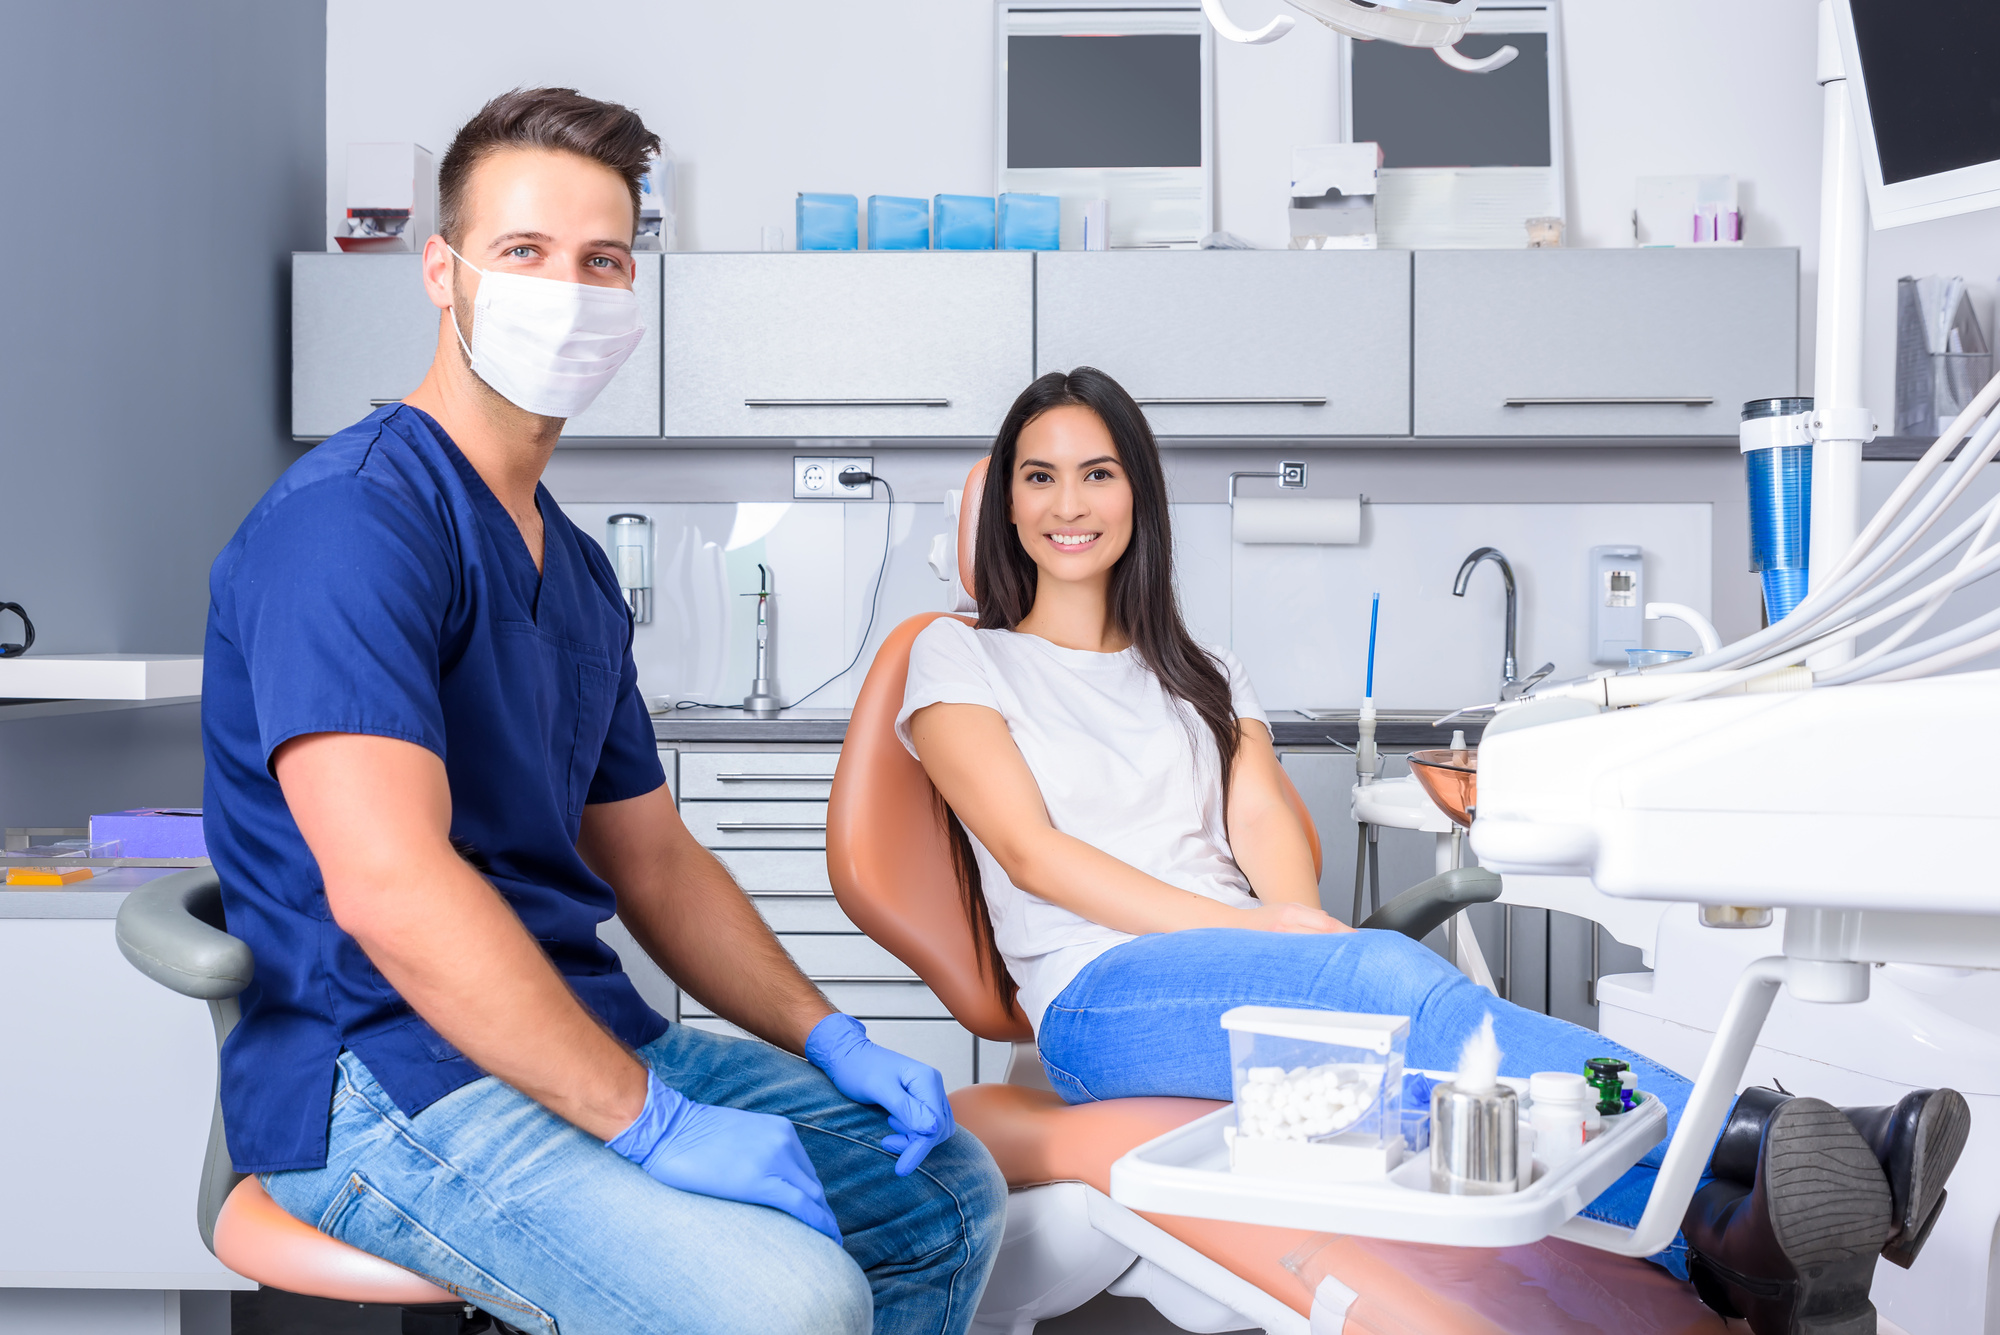 Dental surgery near me: Do you want to know how to choose the right dentist for you? Read on to learn how to make the right choice.